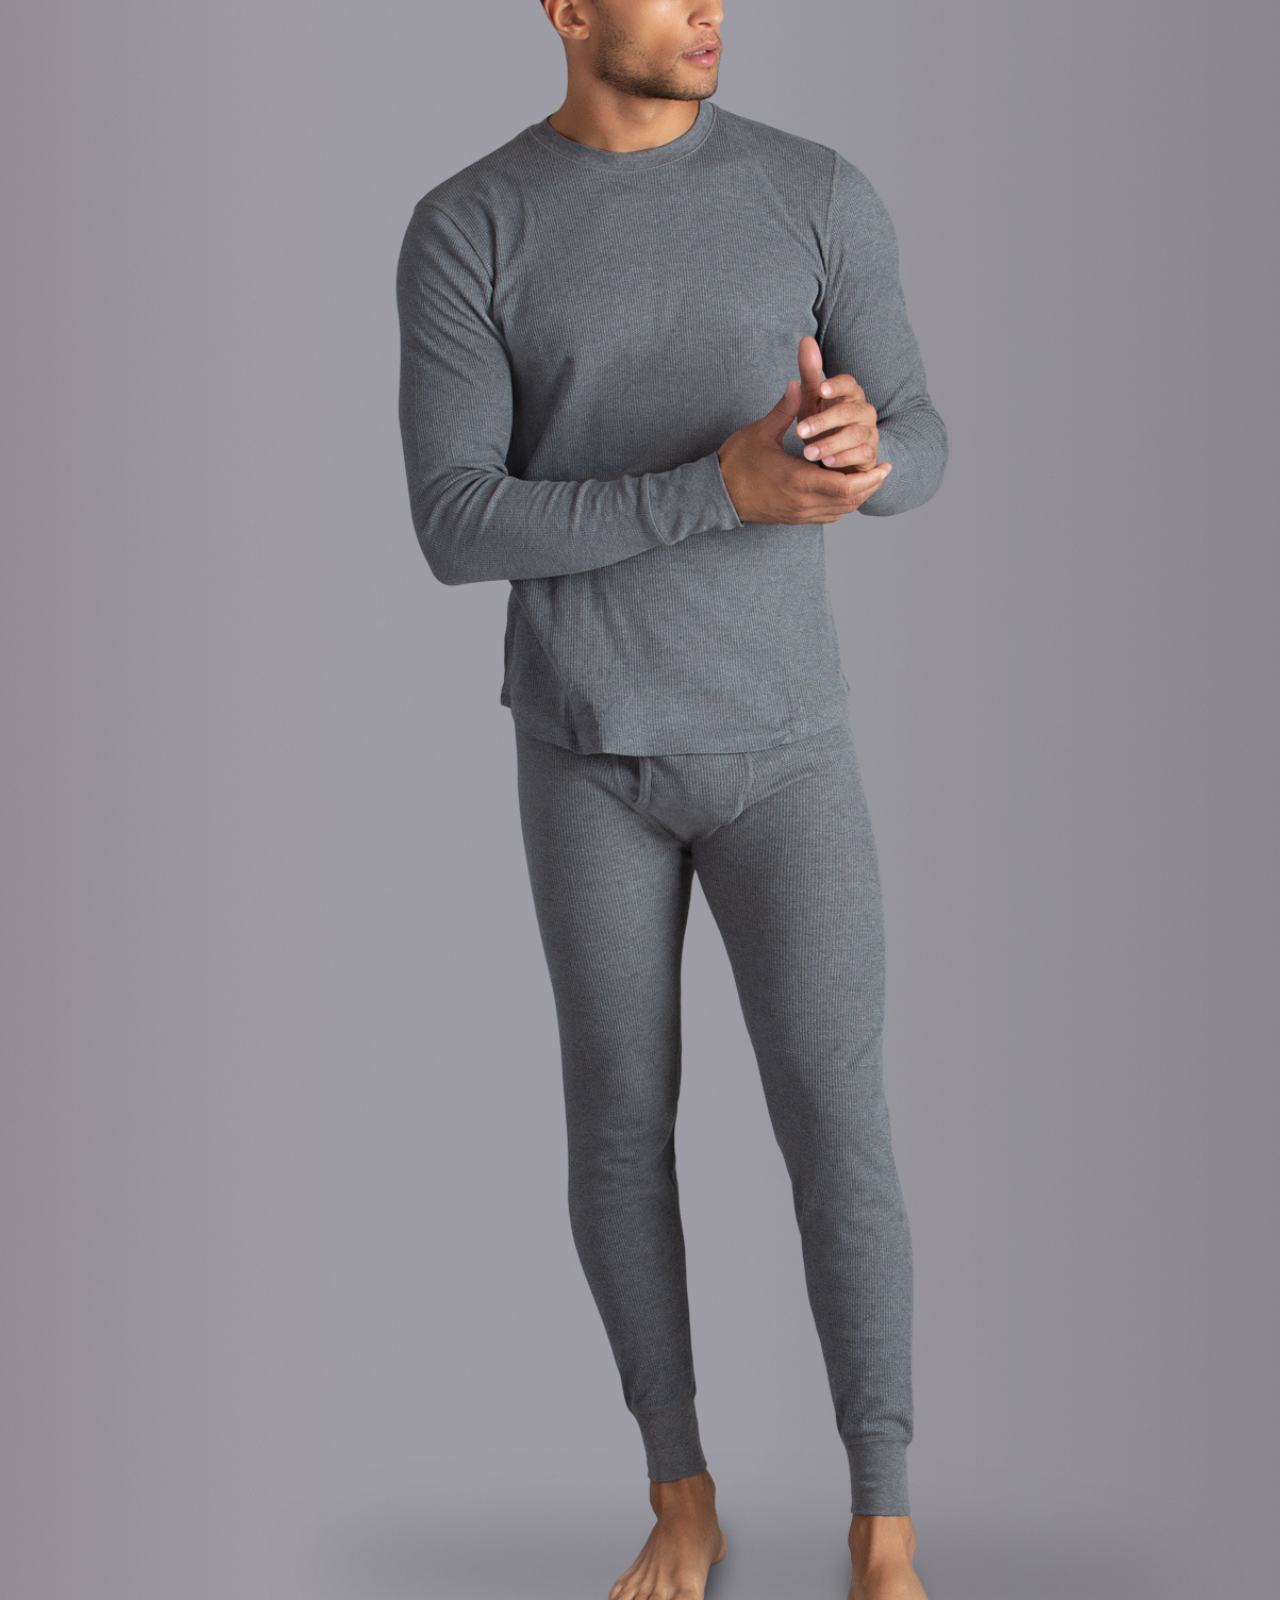 CQR 1 or 2 Pack Men's Thermal Underwear Pants, Midweight Waffle Knit Long  Johns, Winter Cold Weather Thermal Bottoms with Fly 2 Packs of Pants Light  Grey/ Natural X-Large